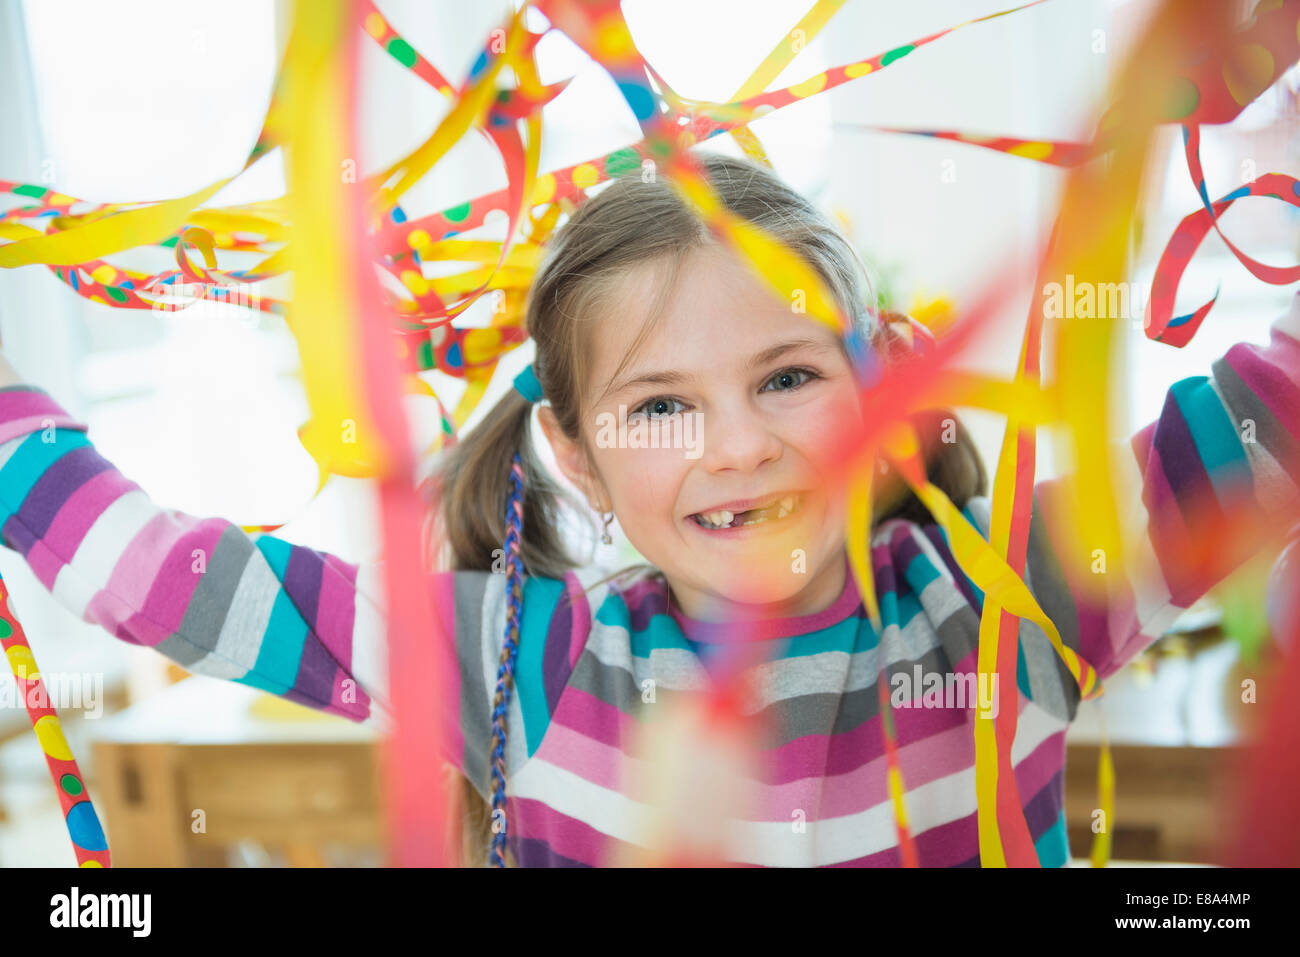 Portrait of girl with blowout paper streamer at birthday party, smiling Stock Photo